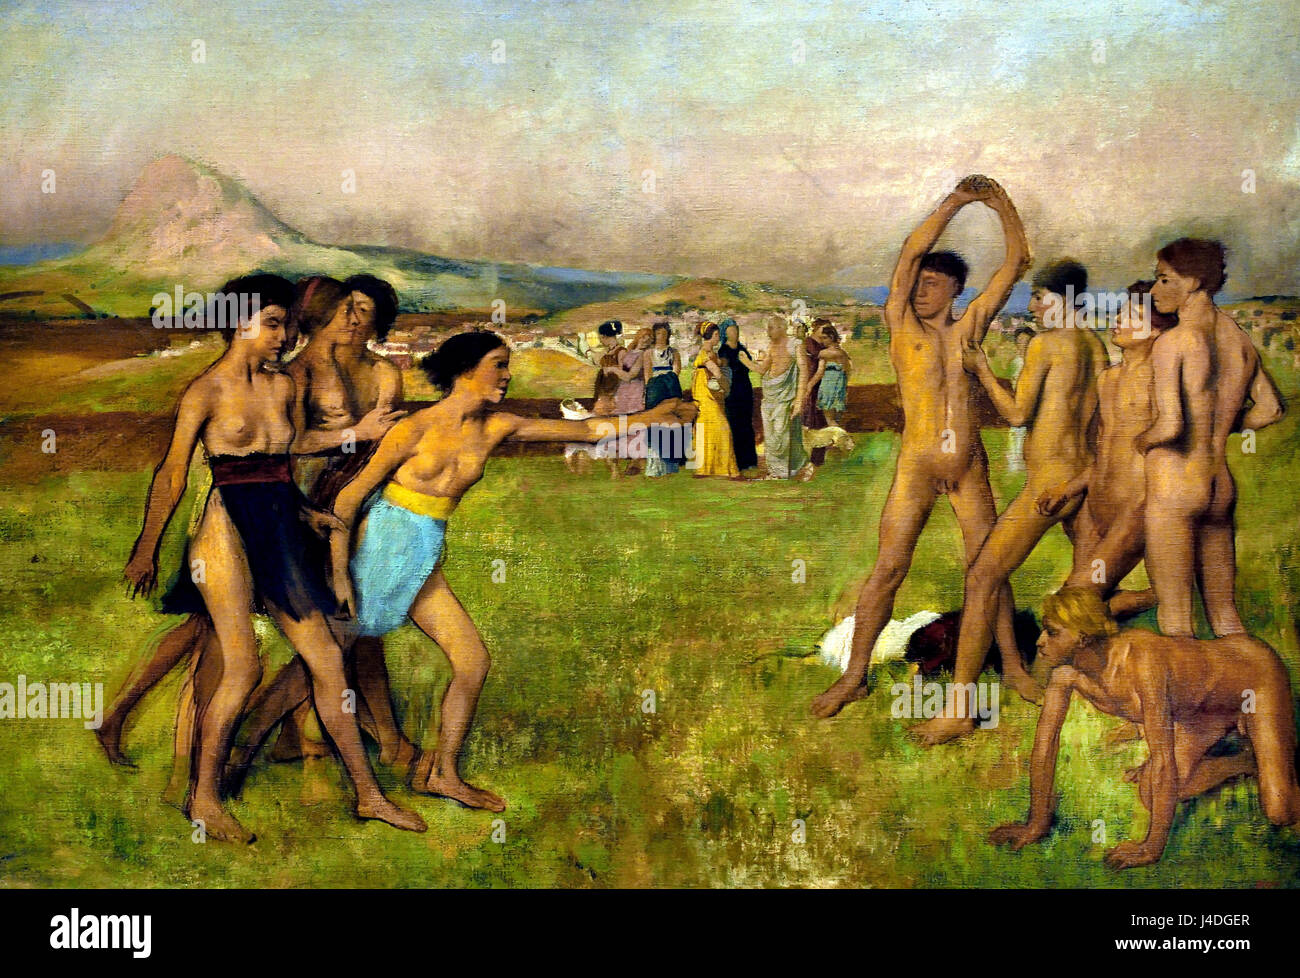 Young Spartans Exercising 1860 by  Hilaire Germain Edgar Degas 1834-1917 France French ( Plutarch writes of Lycurgus, the legislator of ancient Sparta, ordering Spartan girls to engage in wrestling contests; here they urge the boys to fight. ) Stock Photo